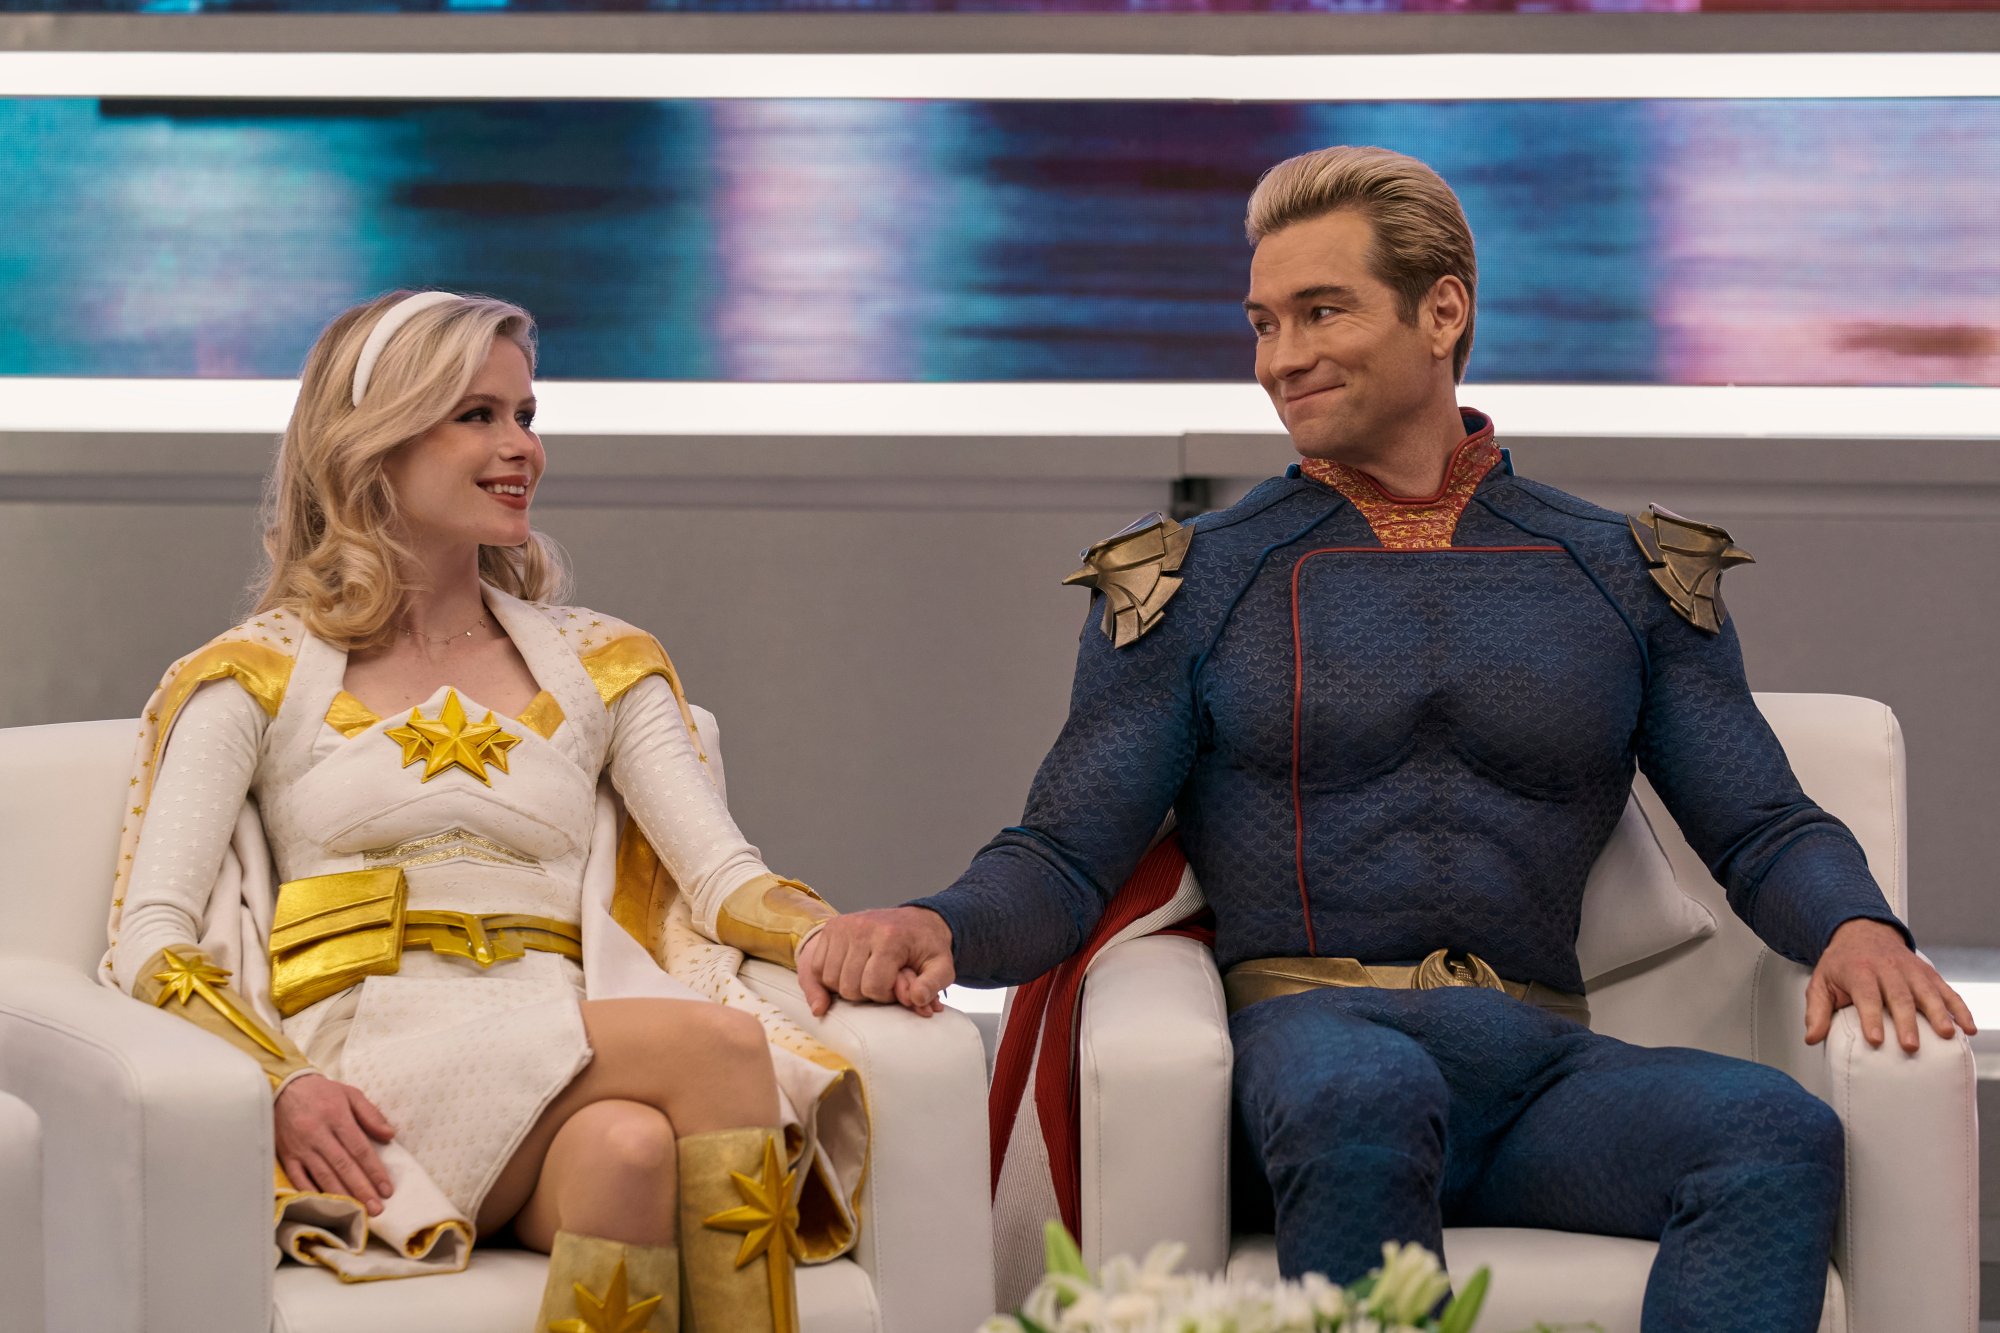 Erin Moriarty and Antony Starr as Starlight and Homelander in 'The Boys,' which will get a spinoff series ahead of season 4. The two are sitting next to one another in white armchairs and smiling. Homelander is holding Starlight's knee.